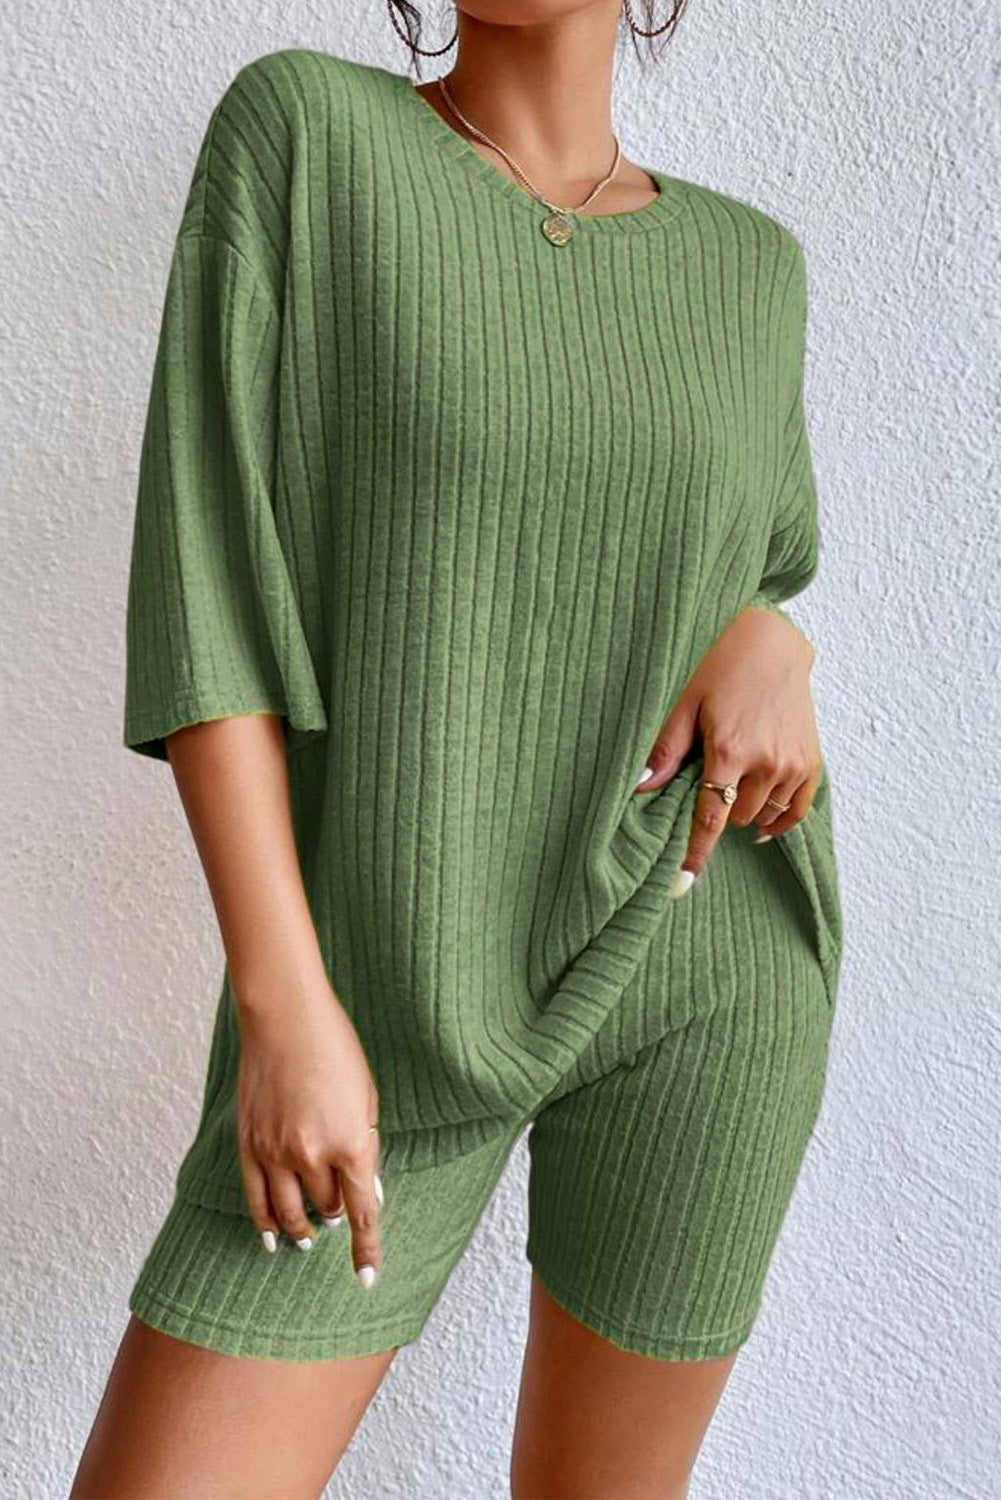 Green short set 85%Polyester+10%Viscose+5%Elastane - Ribbed Knit V Neck Slouchy Two-piece Outfit - pants or short set various colors - women's pants set at TFC&H Co.